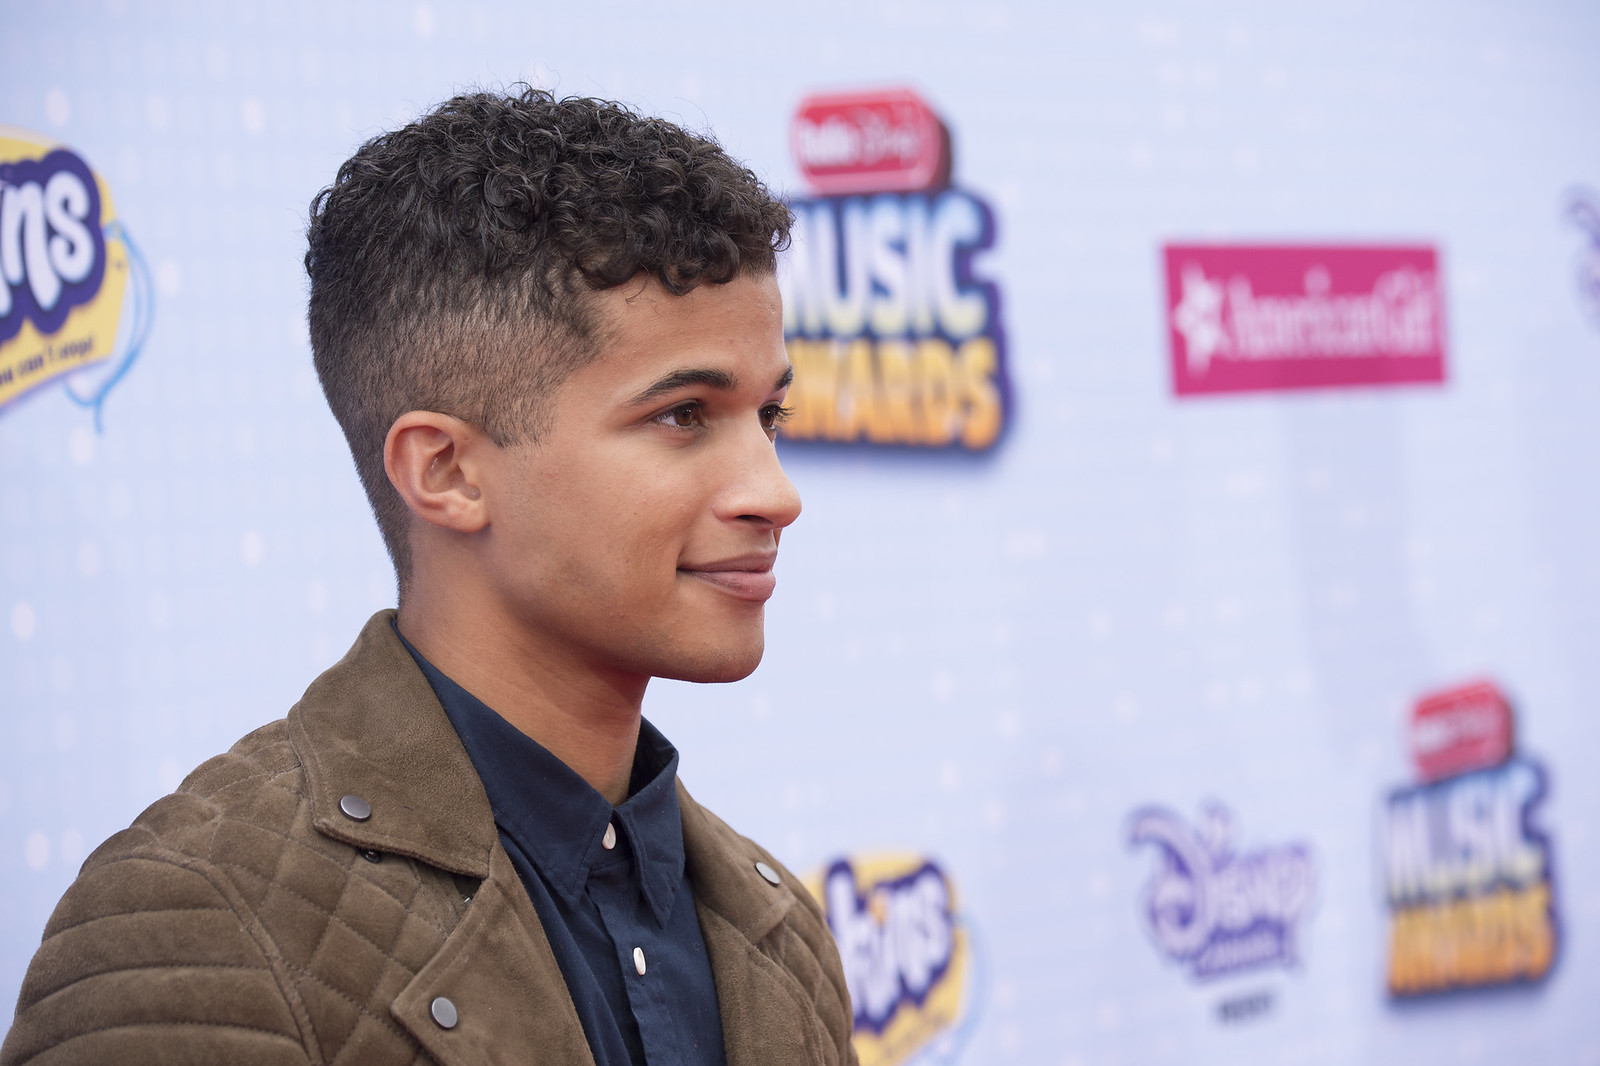 Bham’s own Jordan Fisher returns to starring role on Broadway